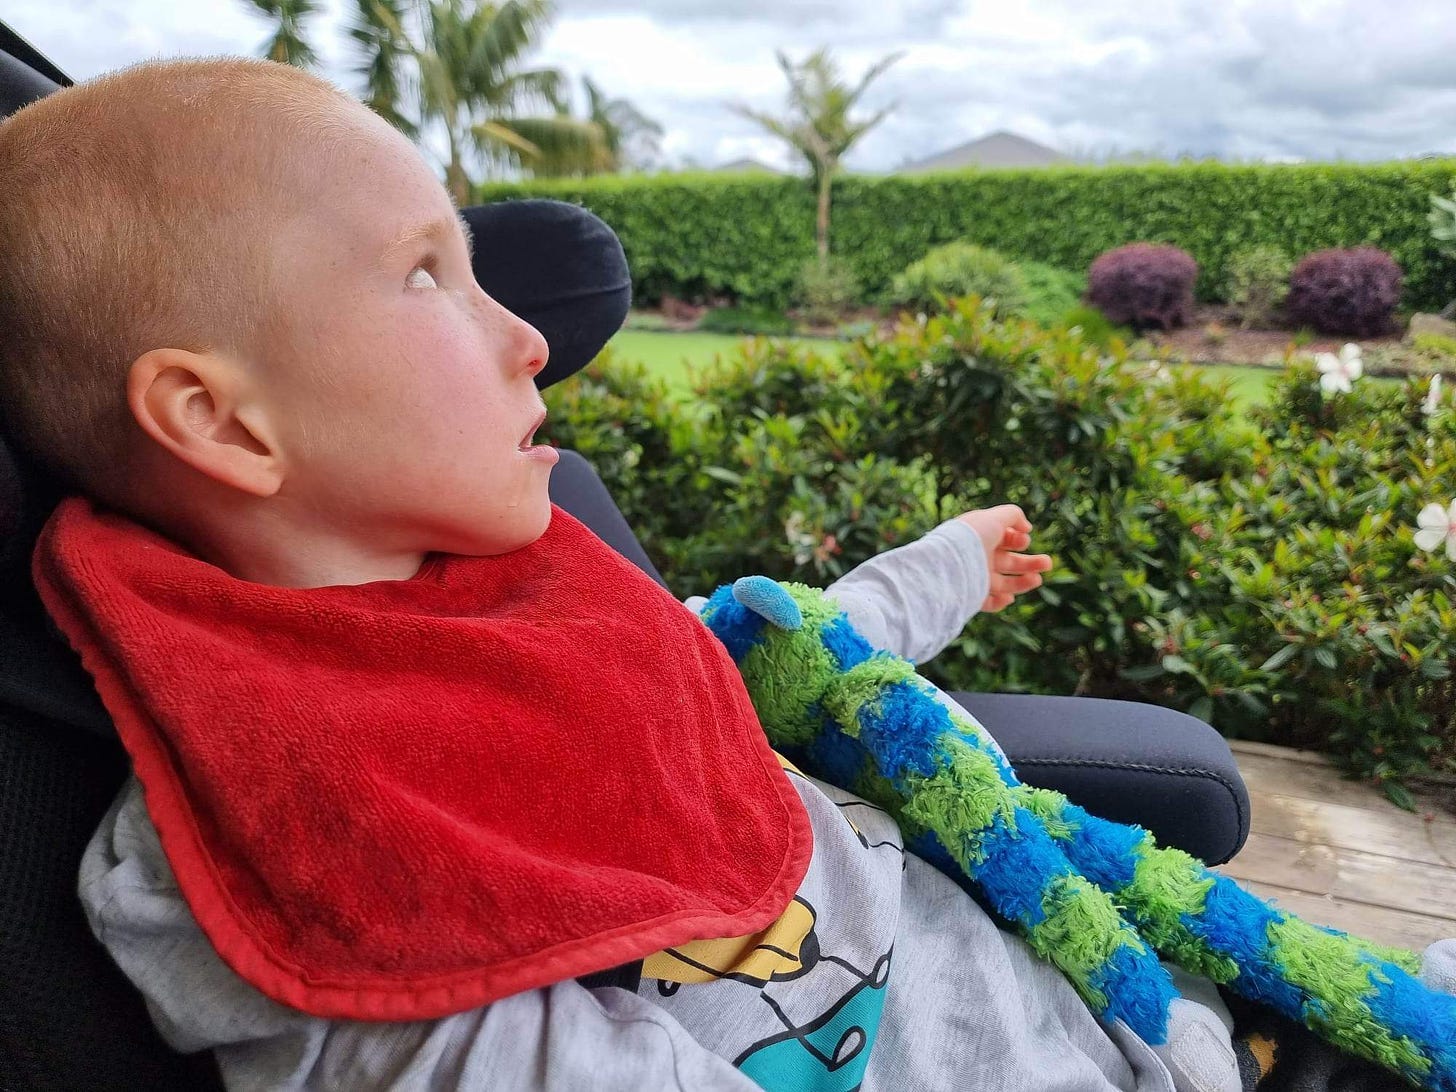 A young boy is in a wheelchair. He is looking out to the garden. He is wearing a bright red bib and holding a green and blue stuffed toy